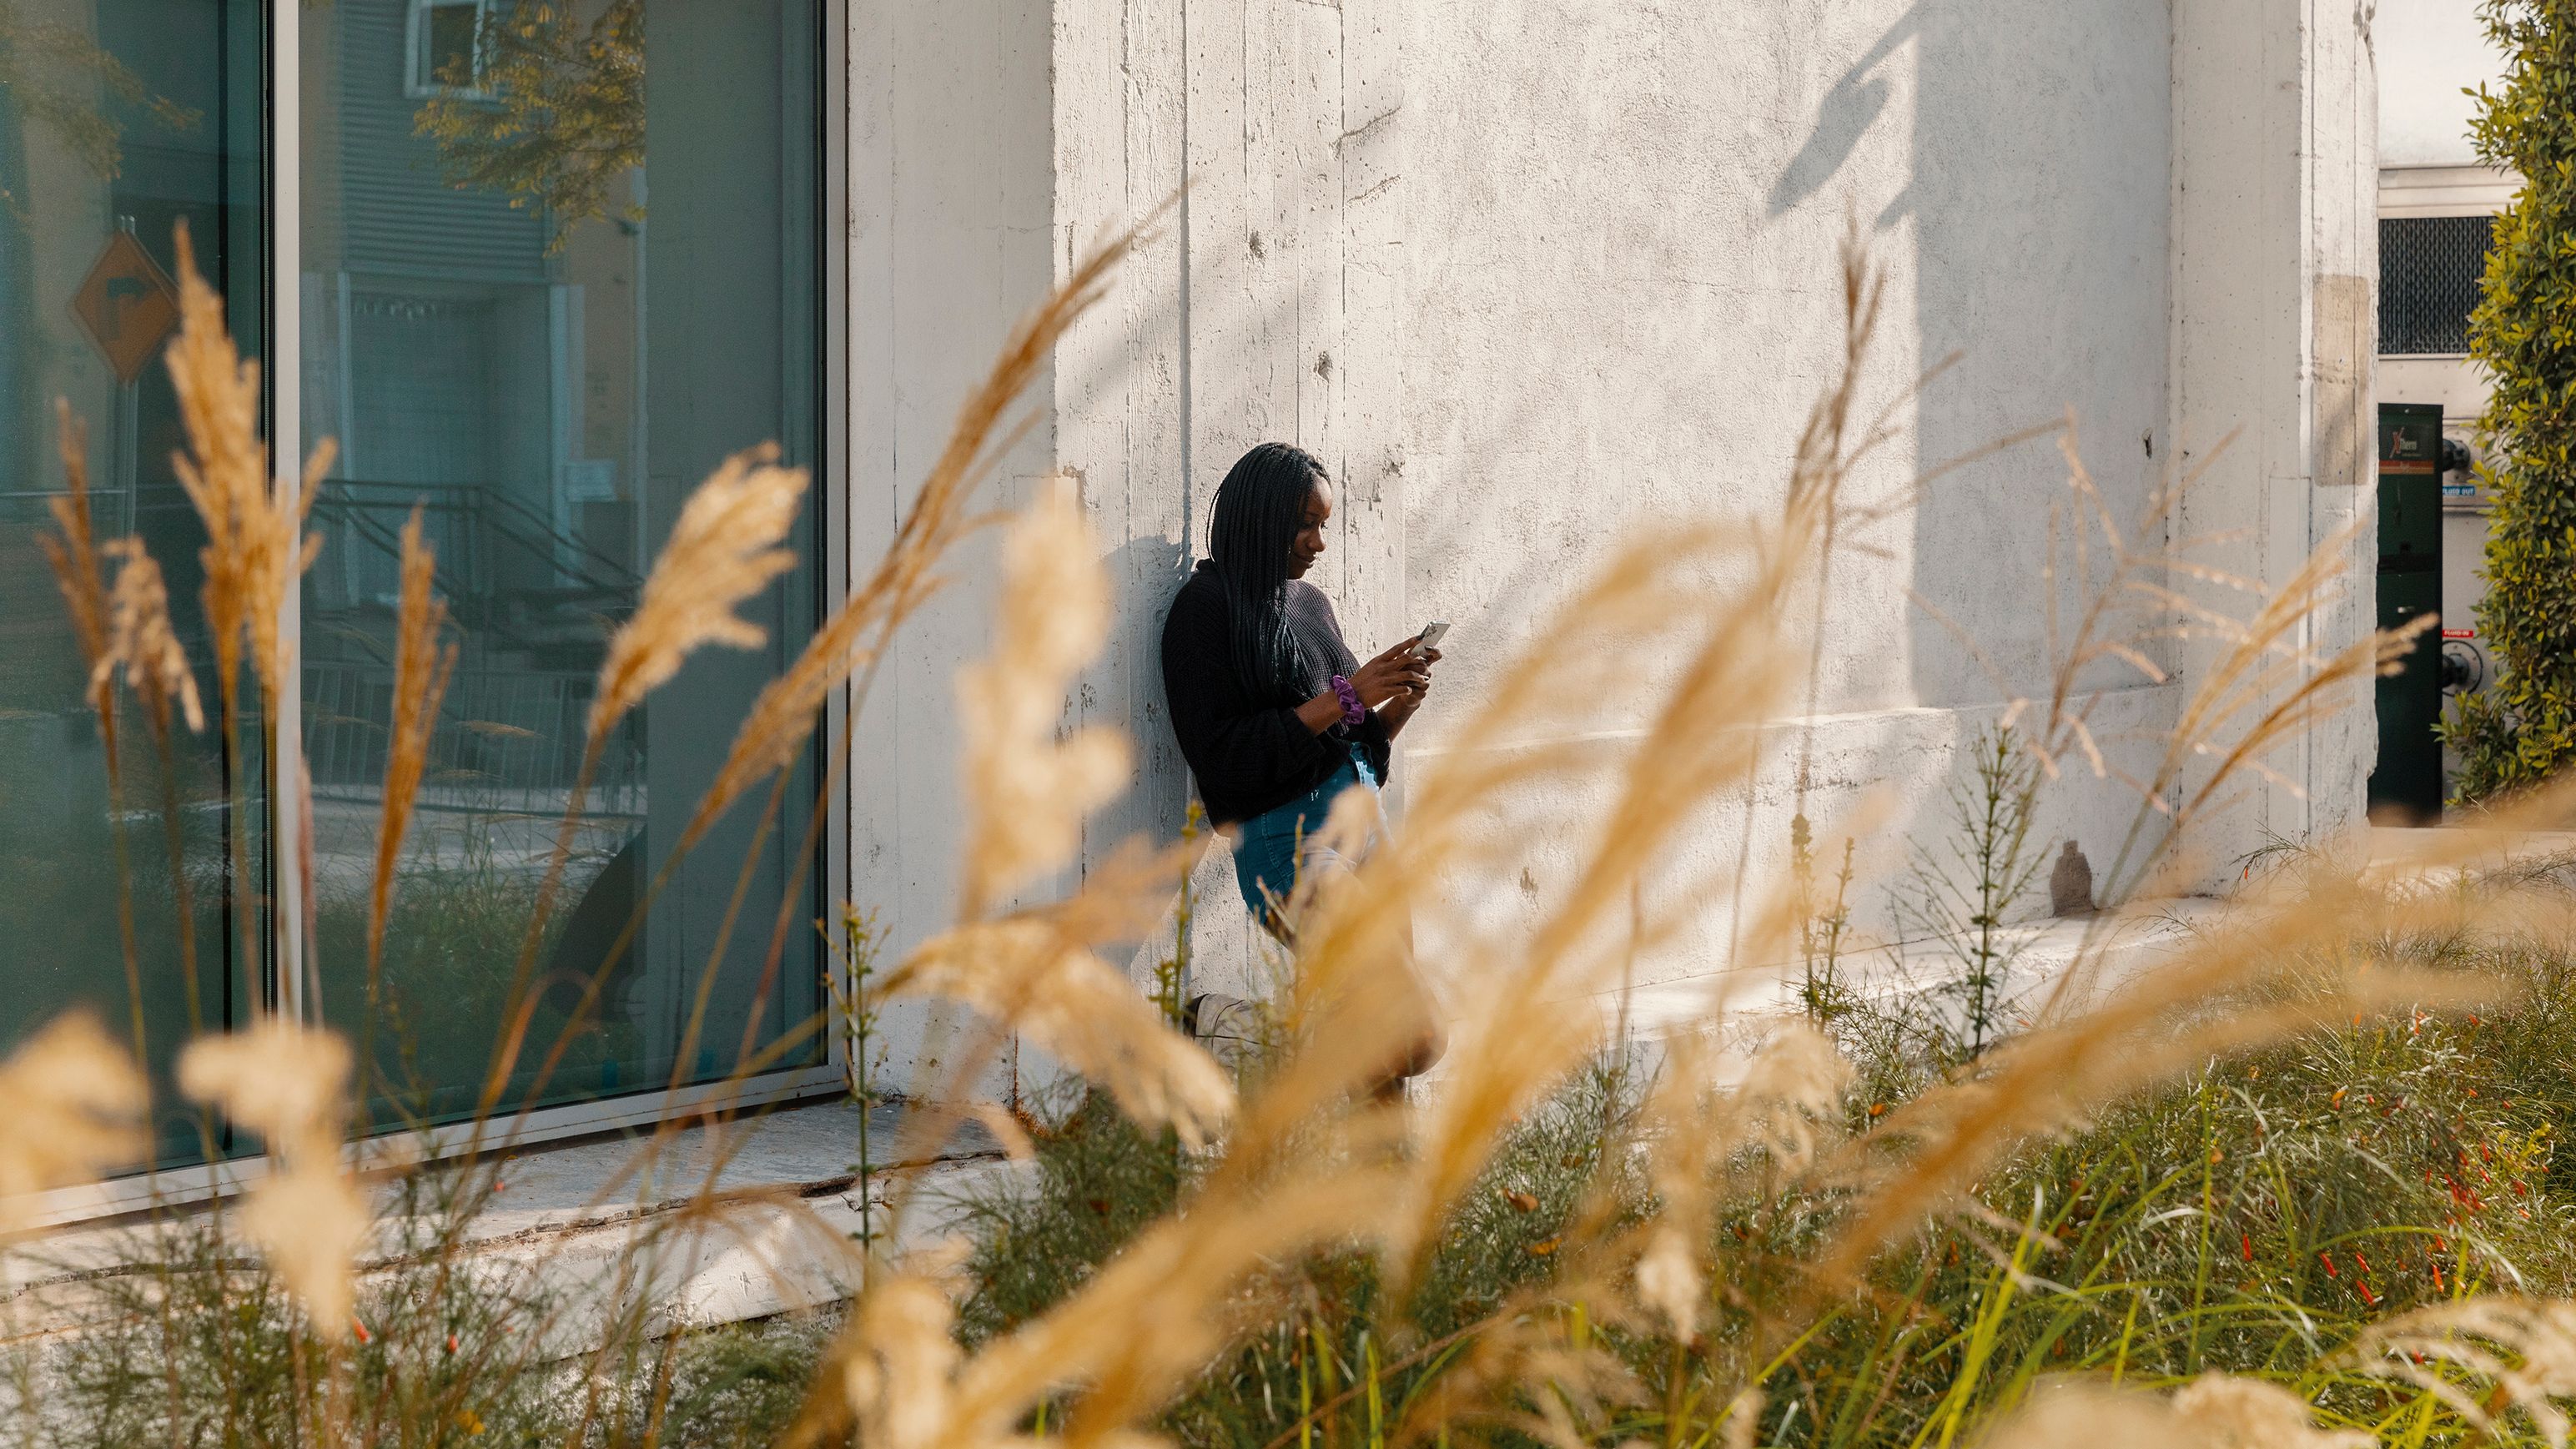 A person leaning against a building outside while on their mobile device.